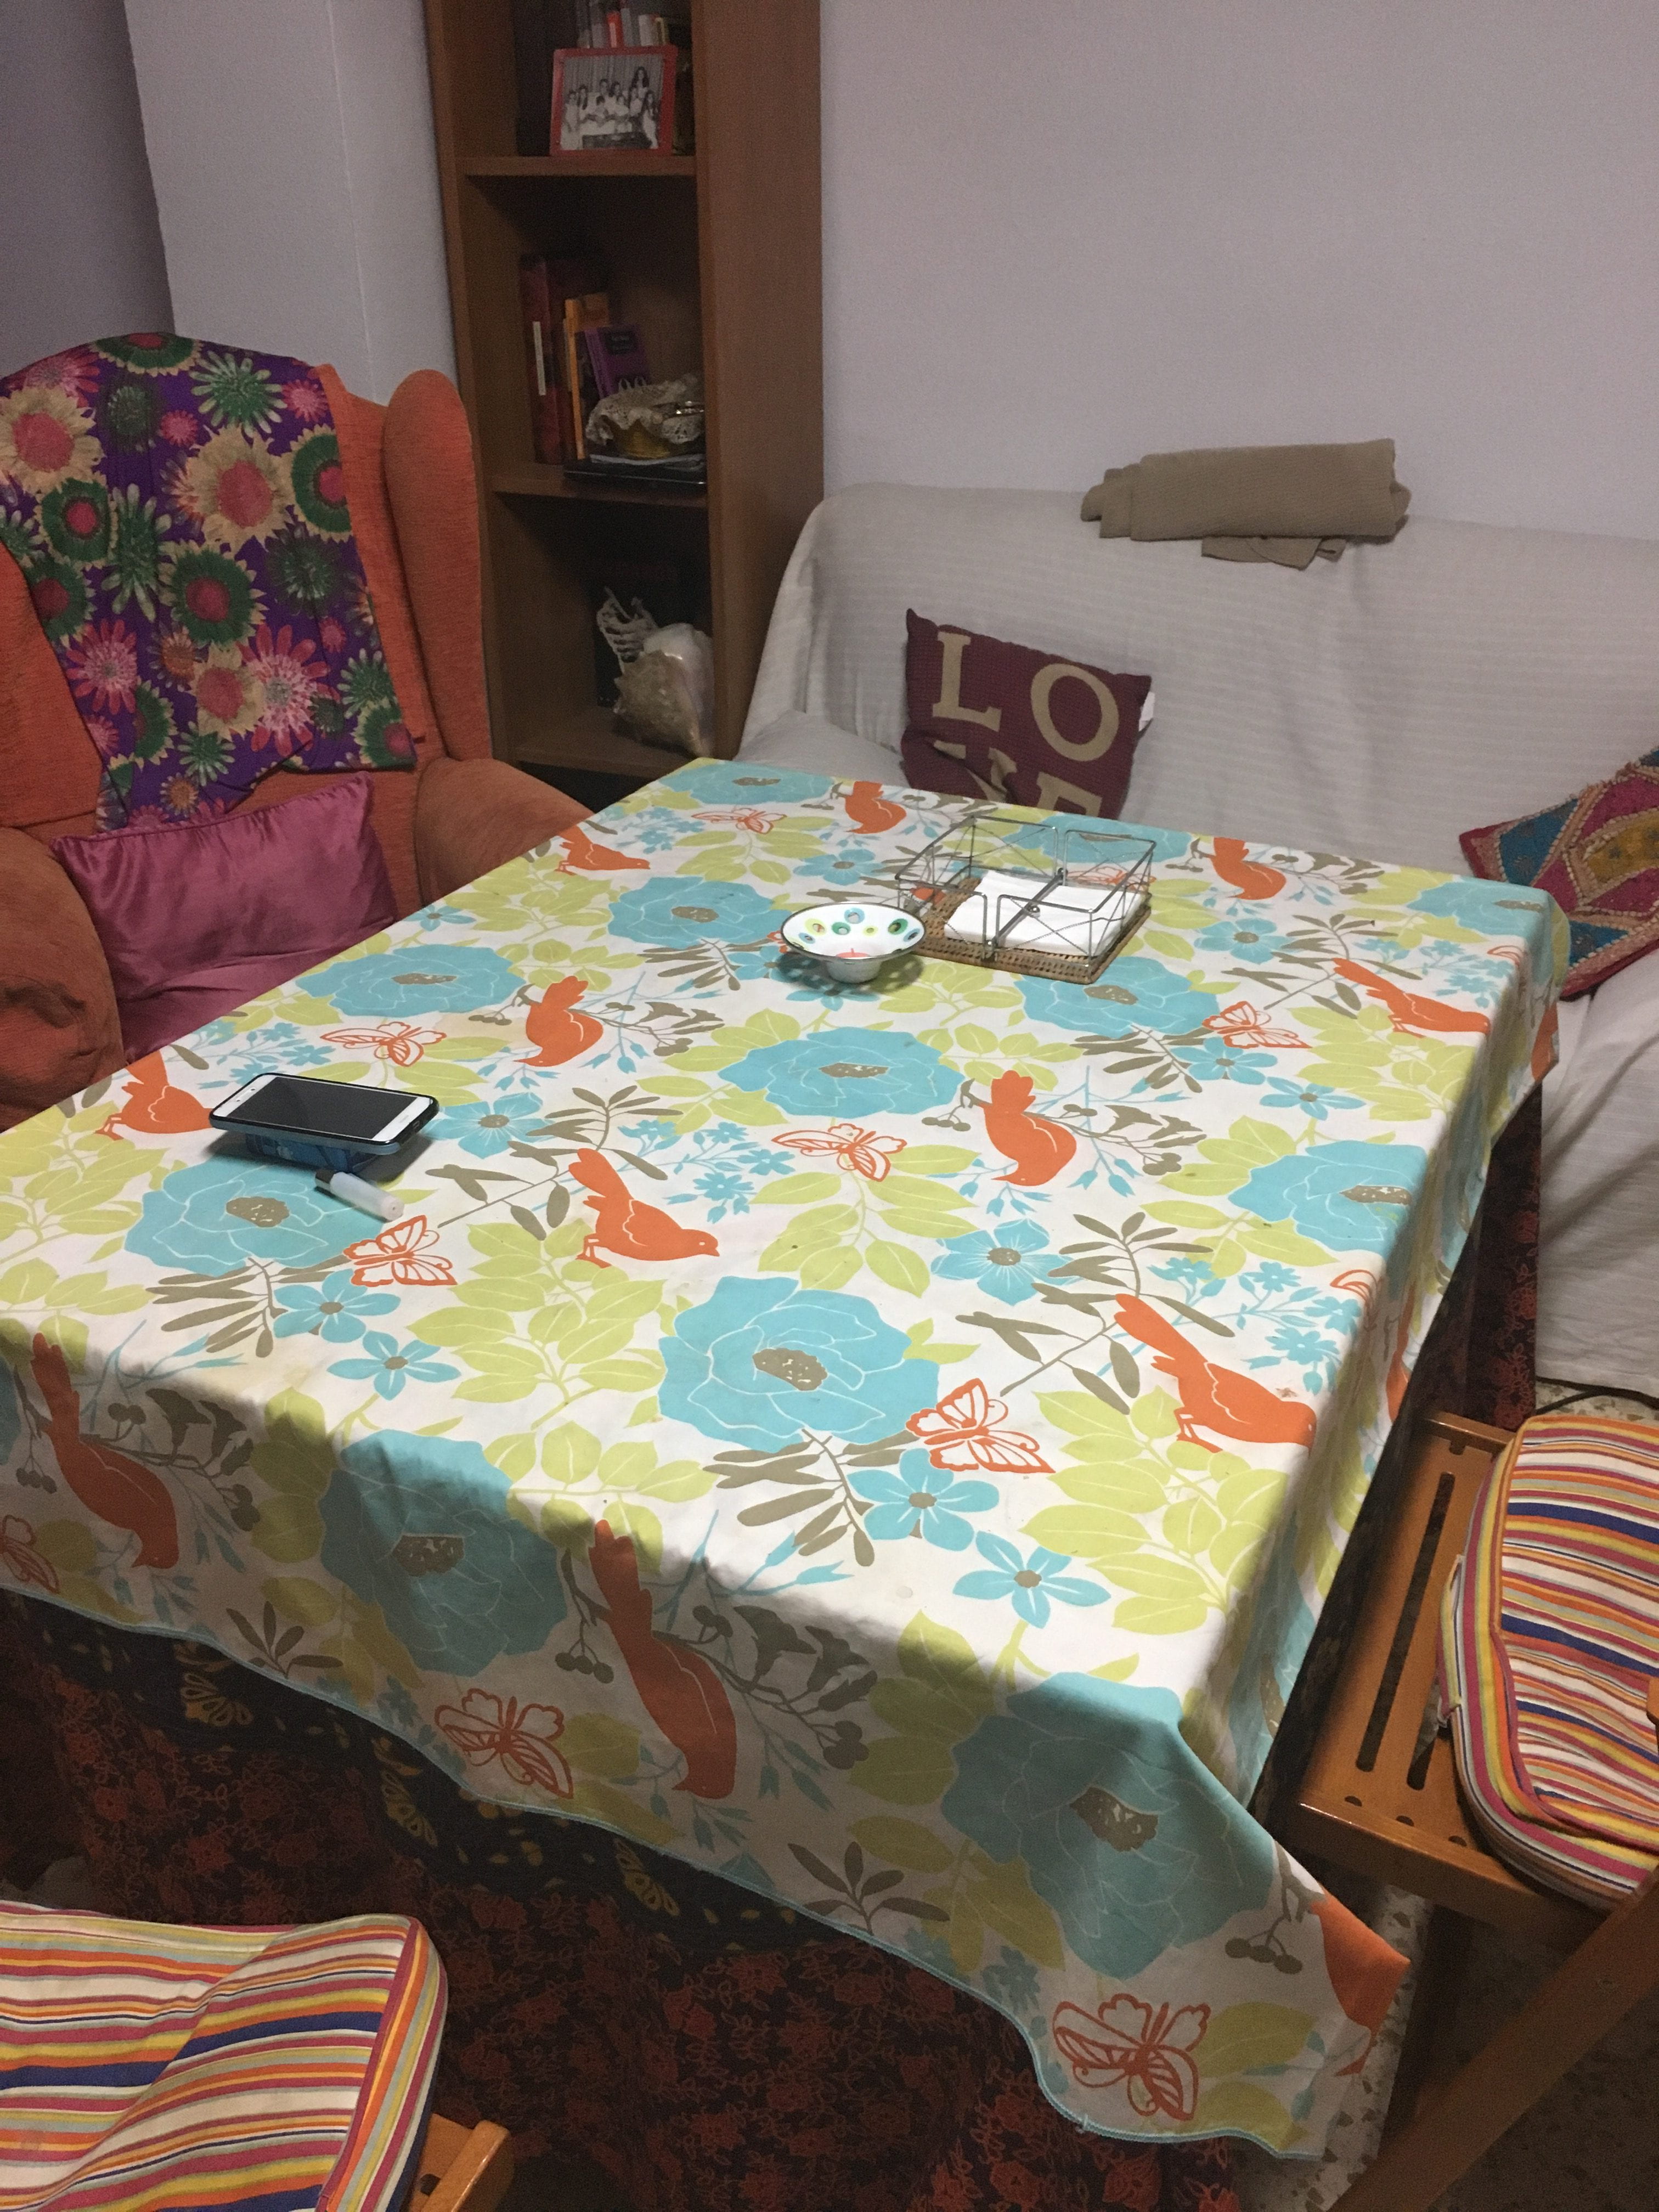 Dining room table with colorful table cloth